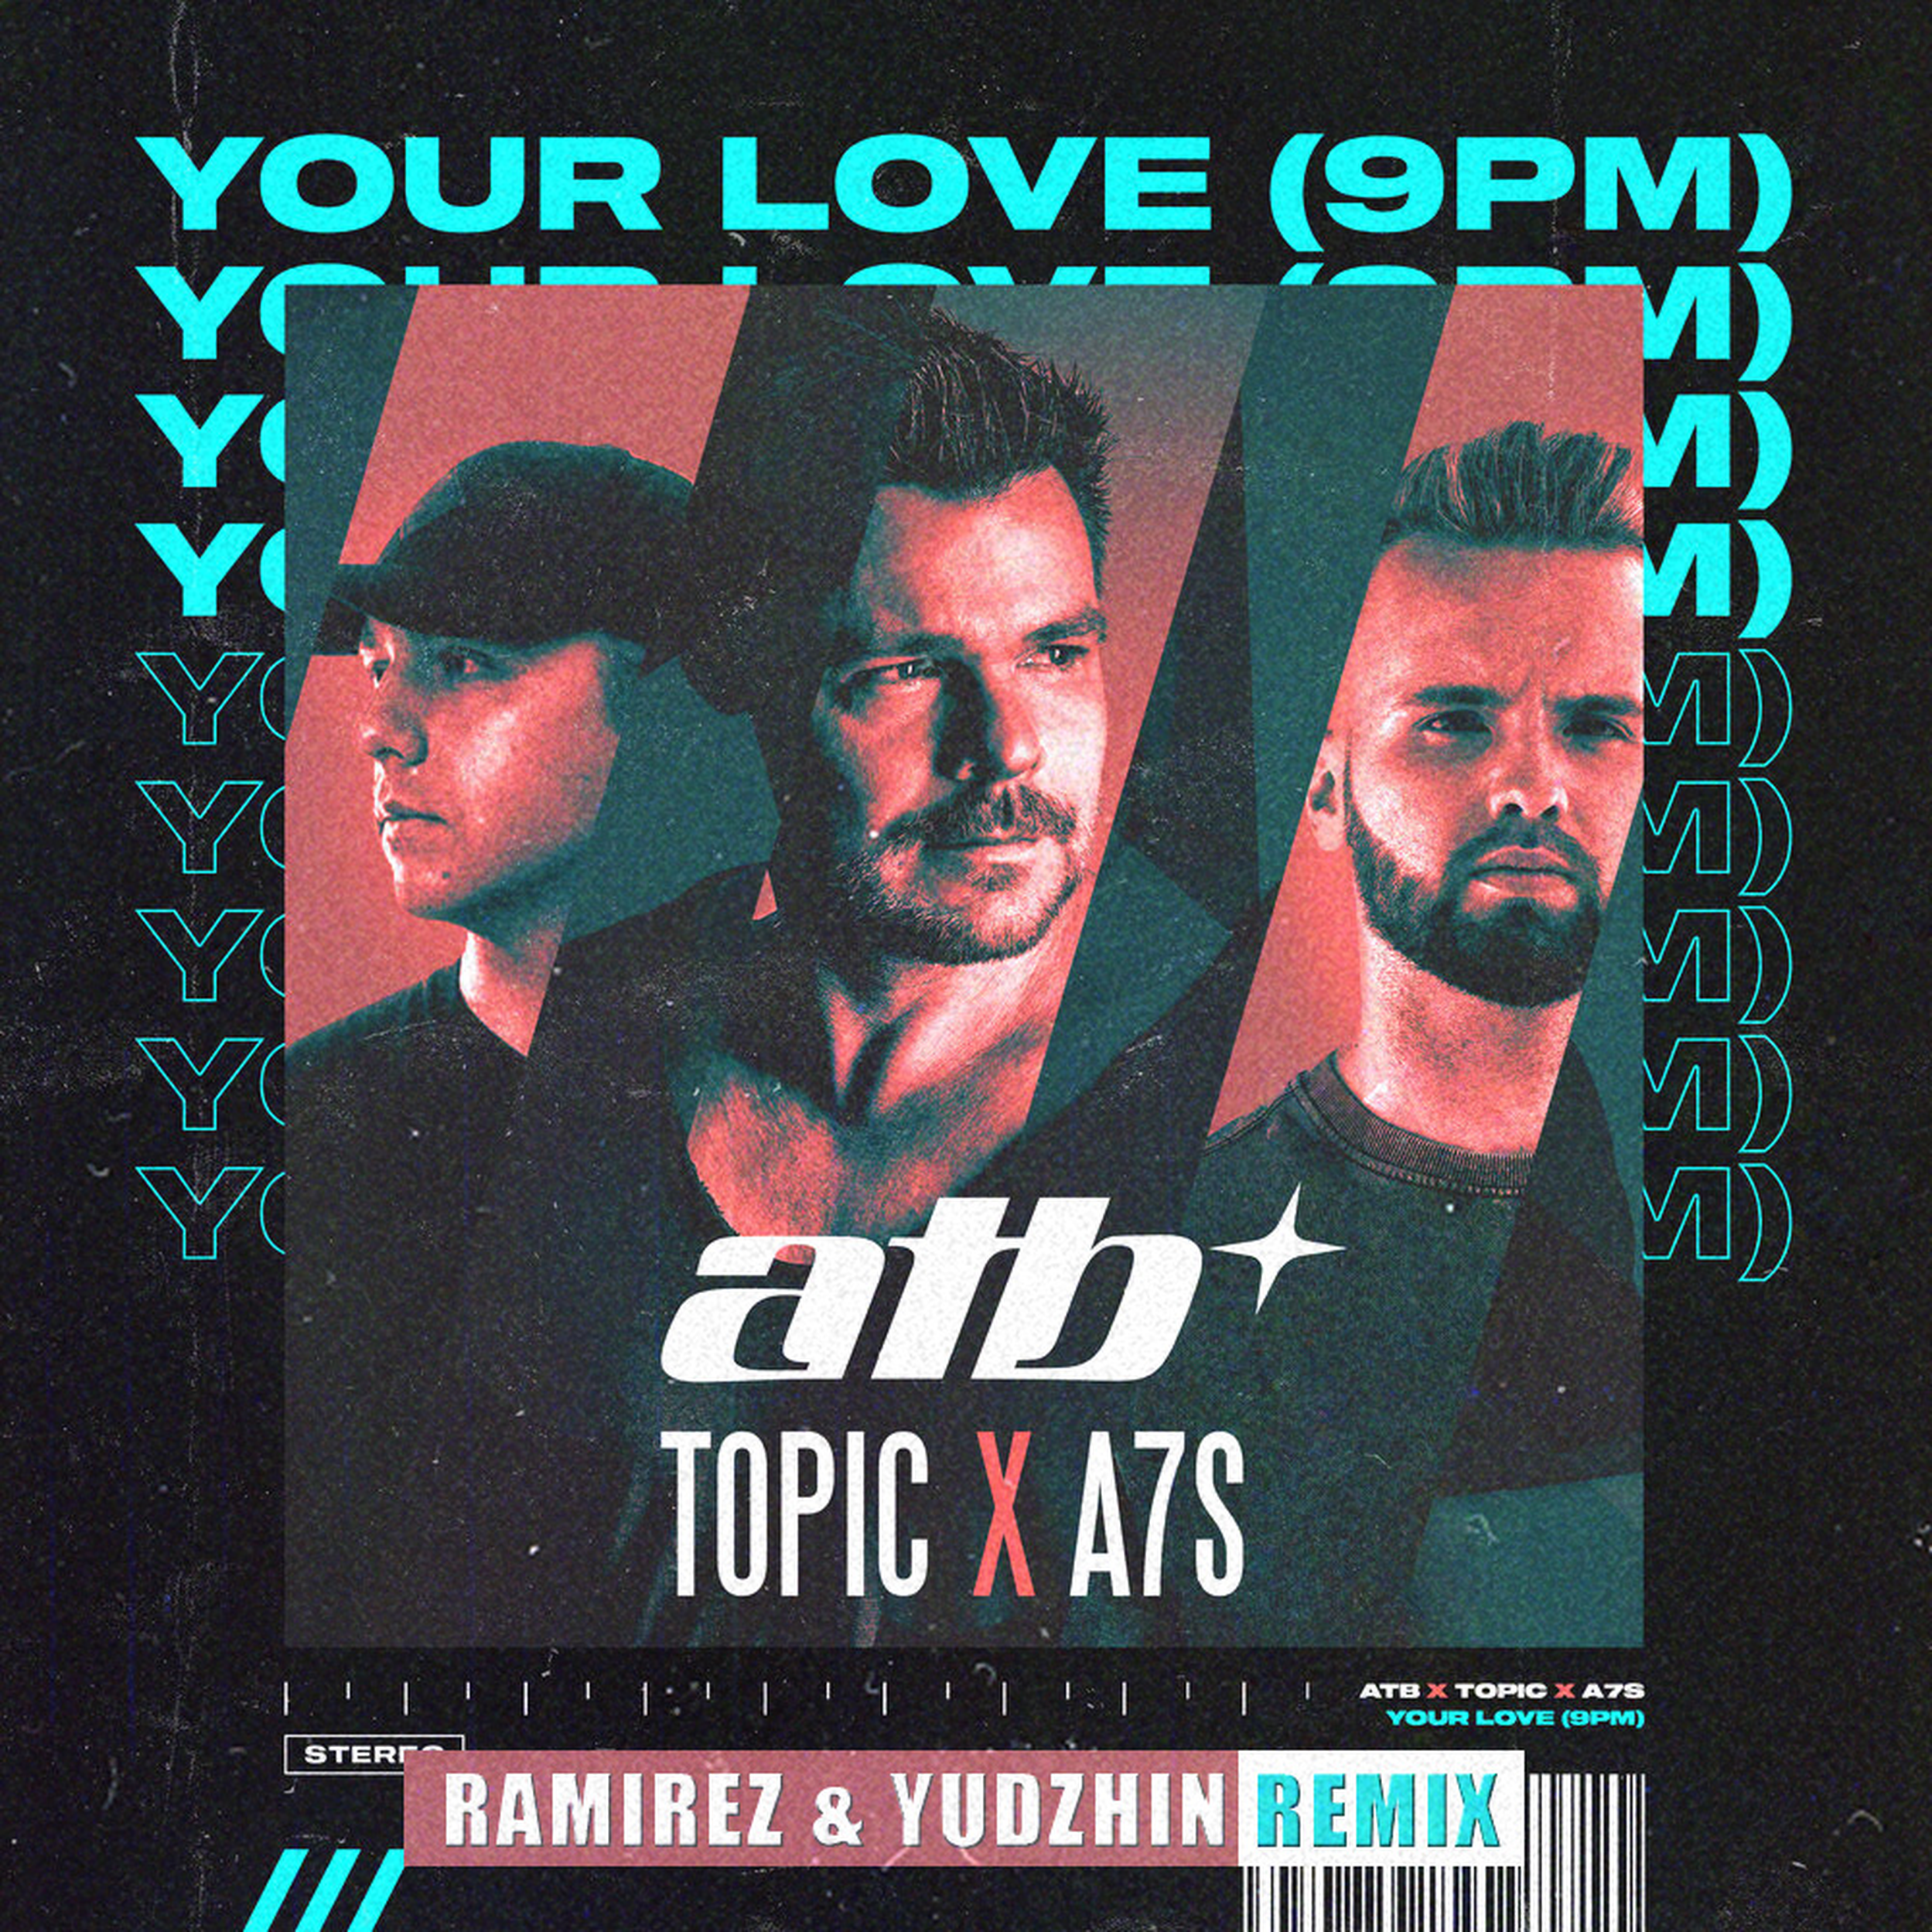 Atb topic a7s your. ATB, topic, a7s - your Love (9pm). ATB topic a7s your Love.